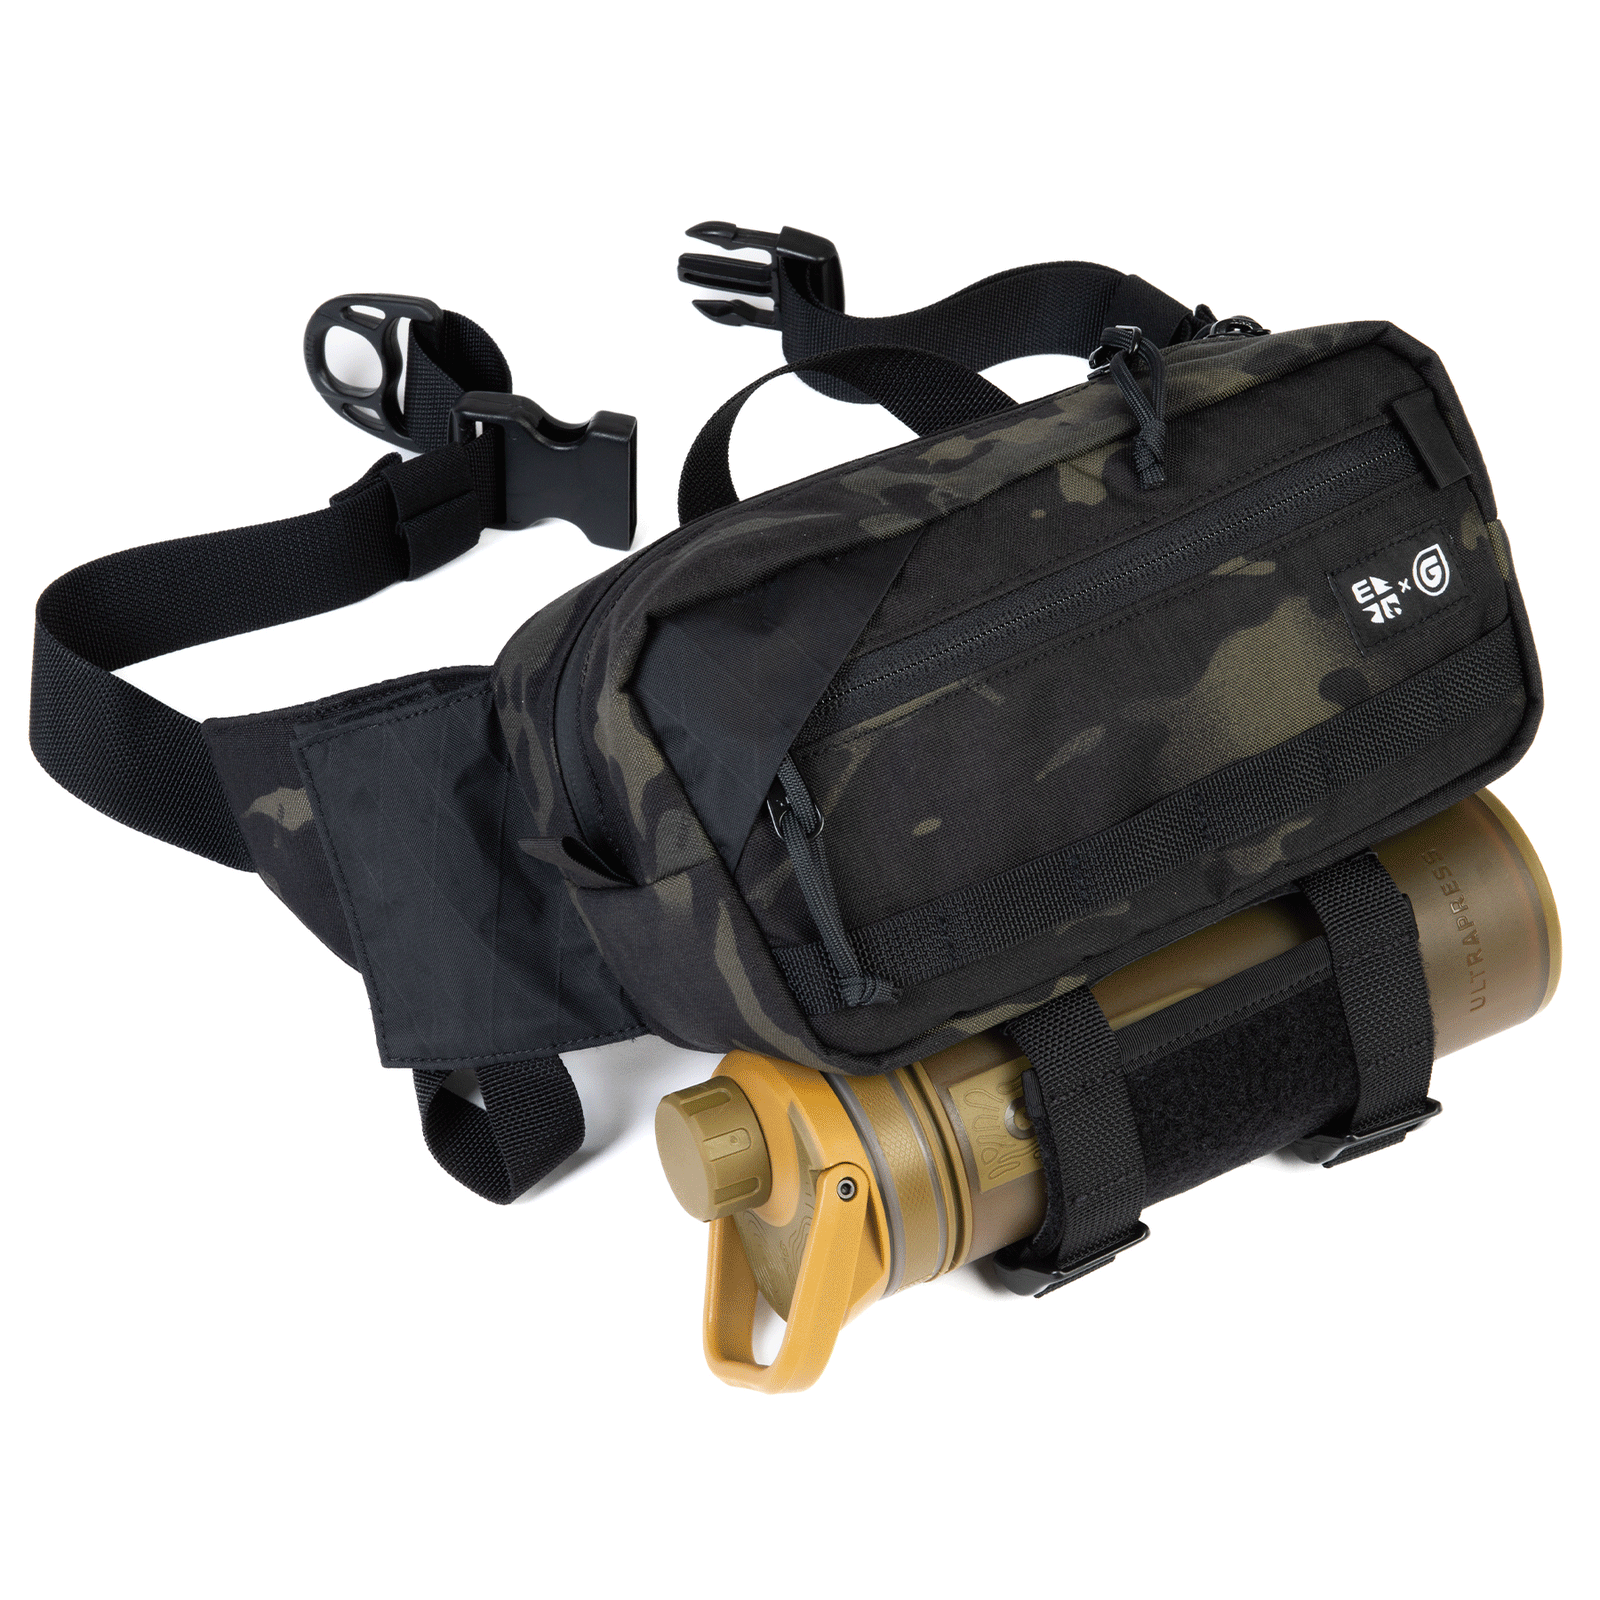 $50 OFF any UltraPress Purifier when you purchase a BottleLock™ Hip Pack.